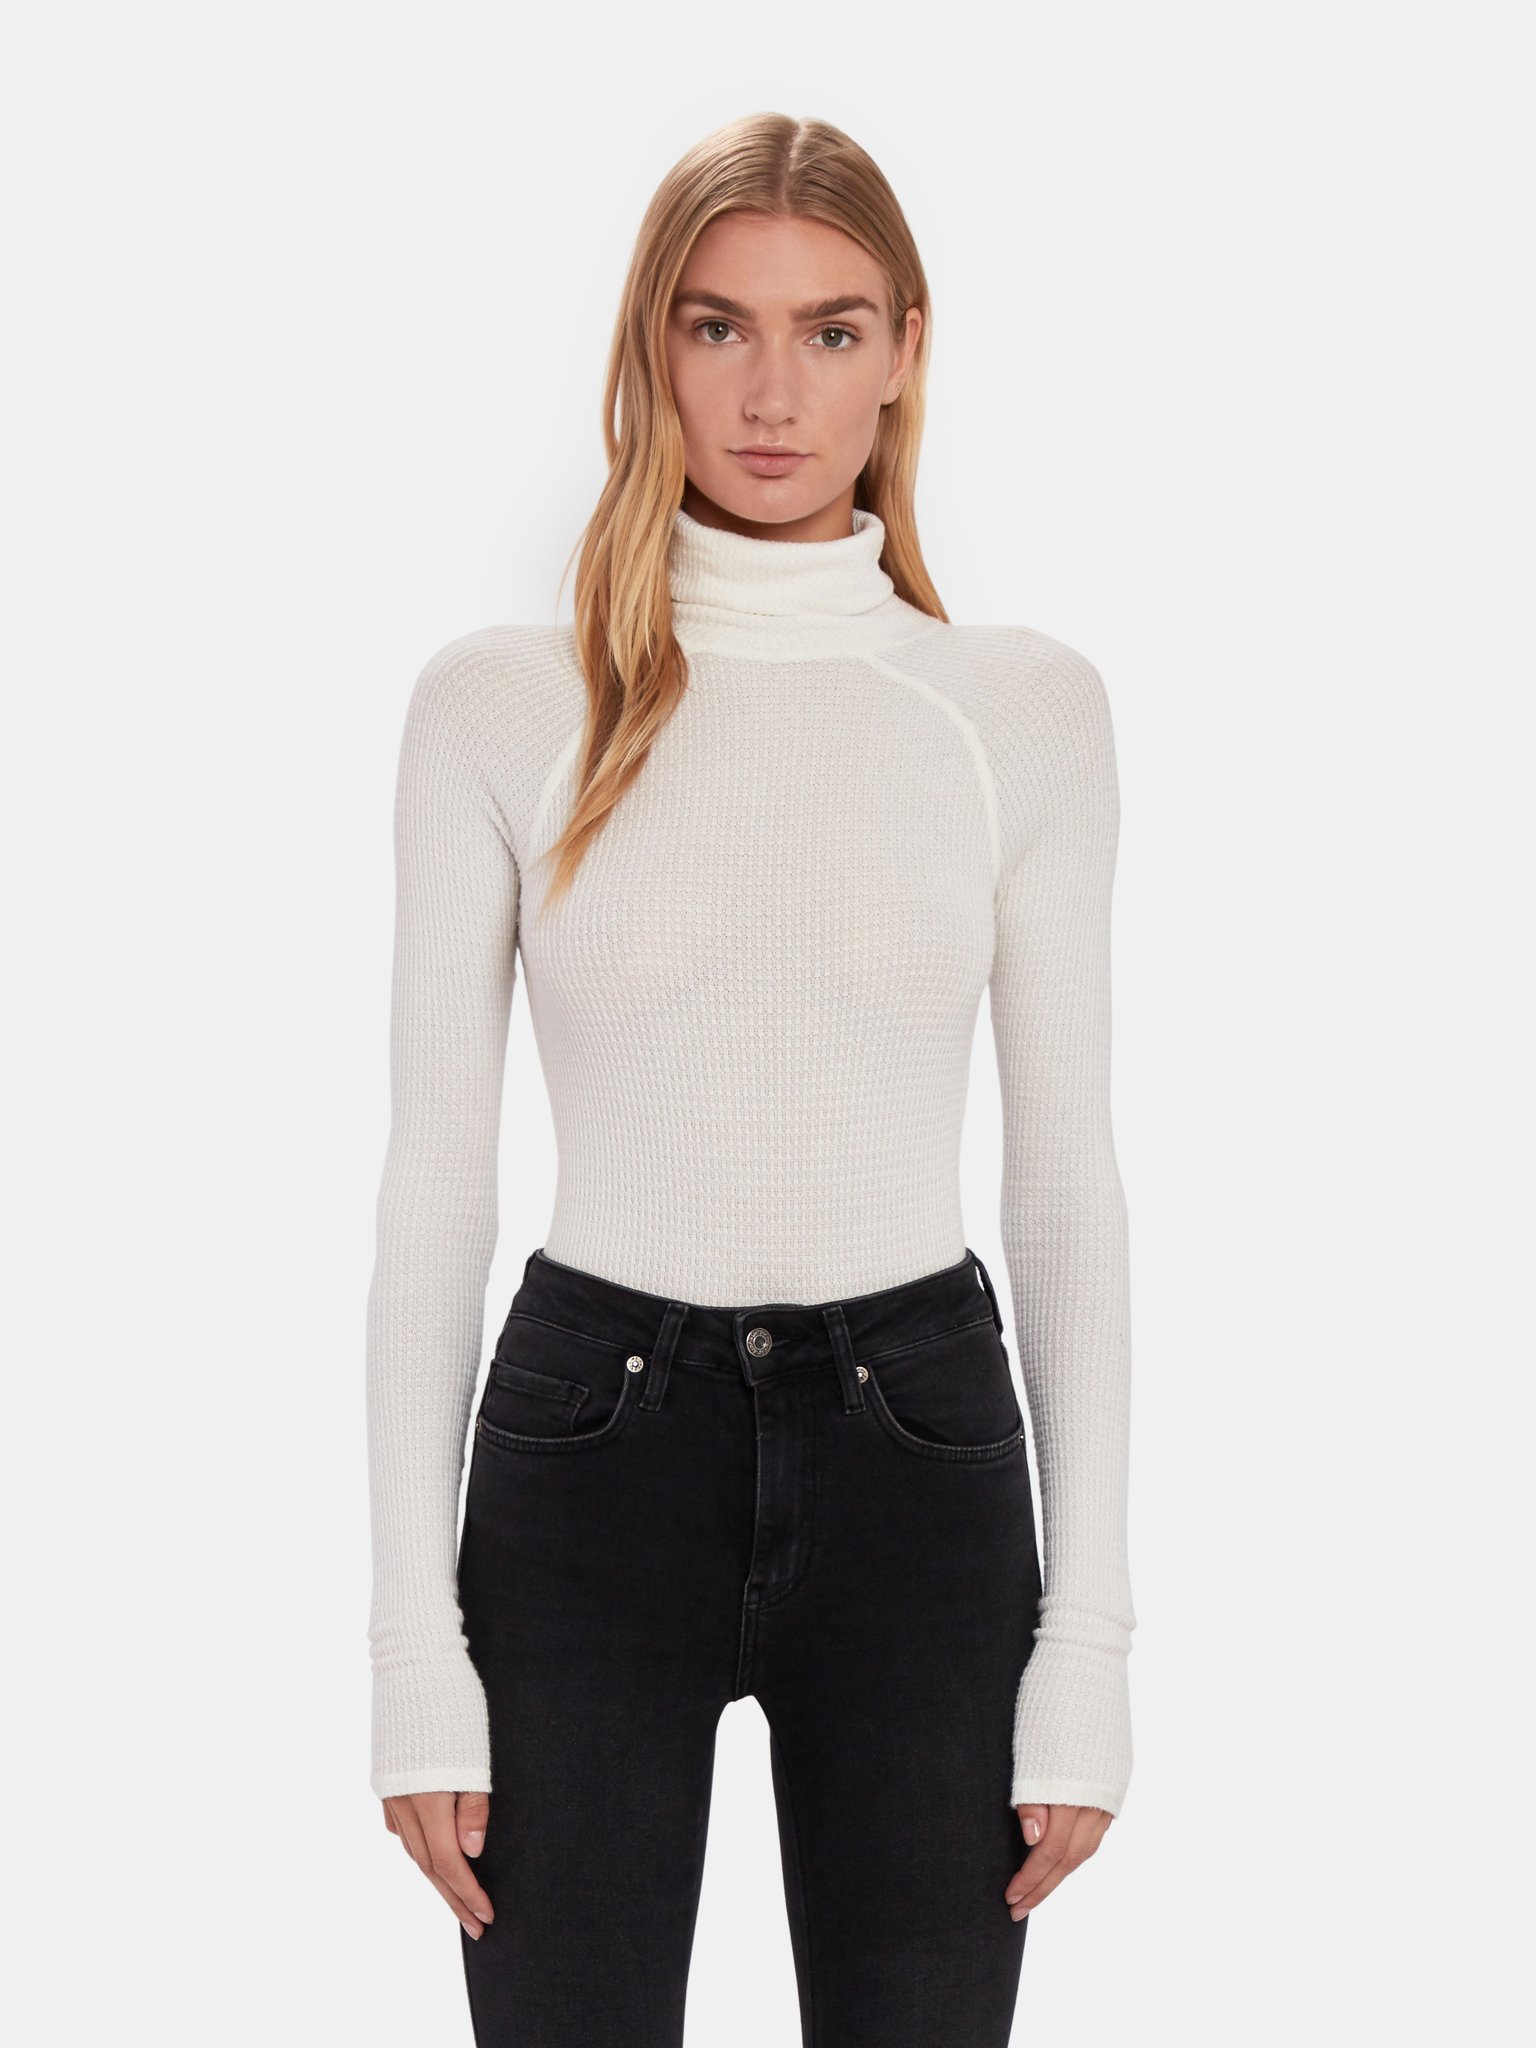 Free People All You Want Thermal Turtleneck Bodysuit | Verishop